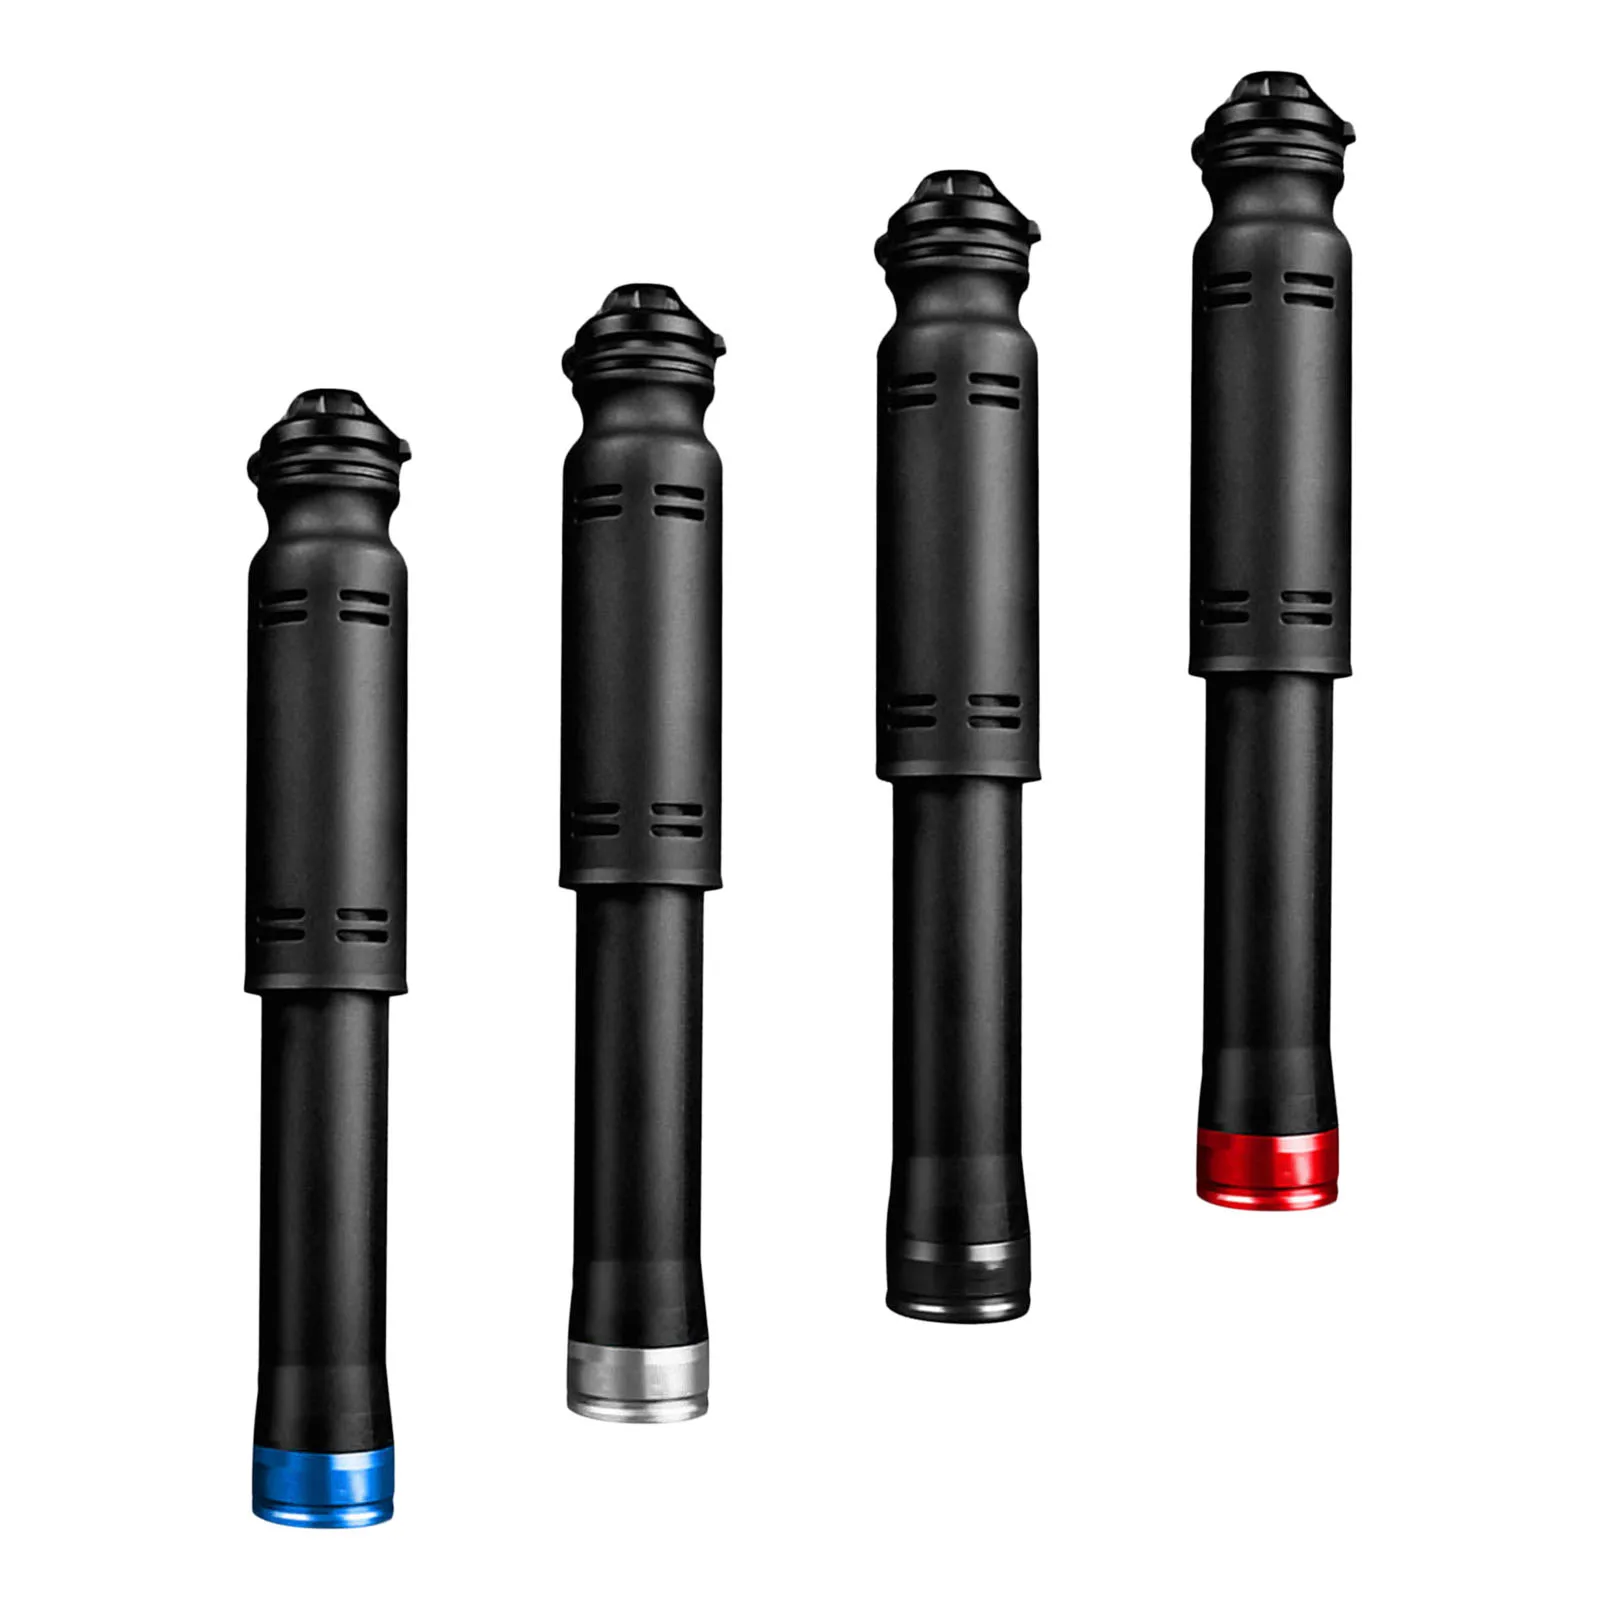 Portable Mounted Adapter Lightweight Road Pressure Valve Puncture Bicycle Pump for Bicycle MTB BMX Basketball Motorcycle